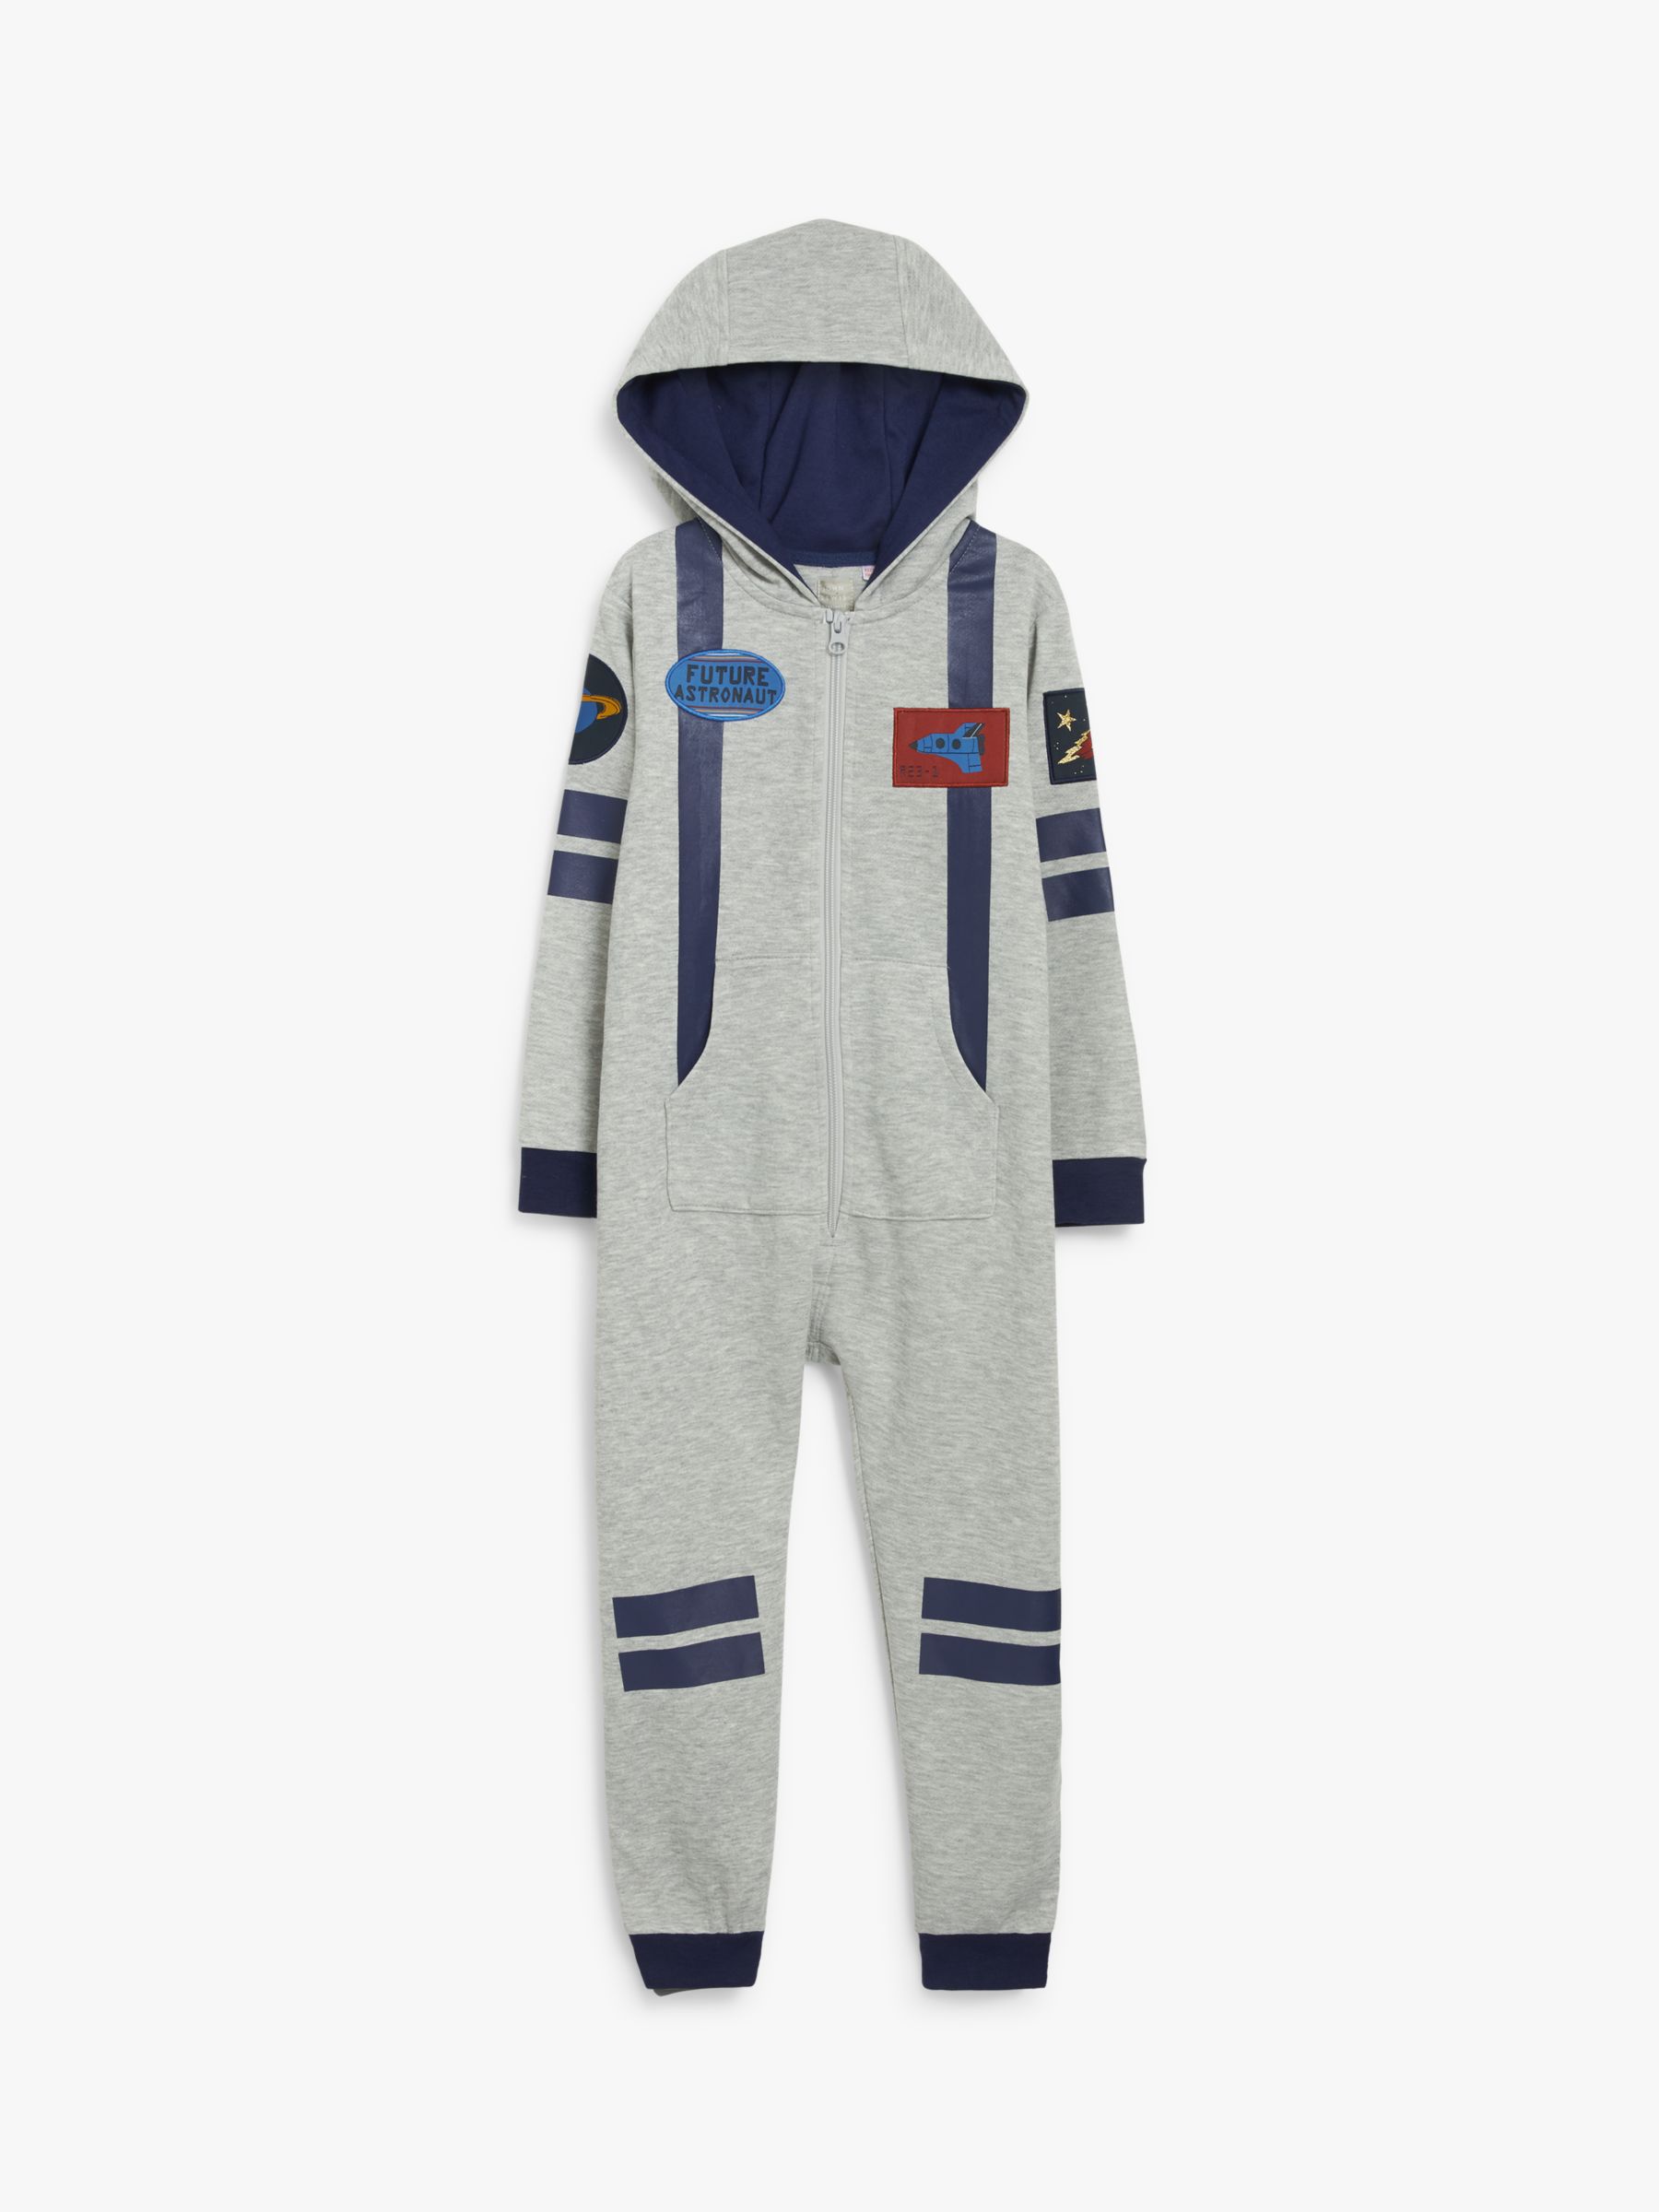 Image of John Lewis and Partners Childrens Astronaut Onesie Grey